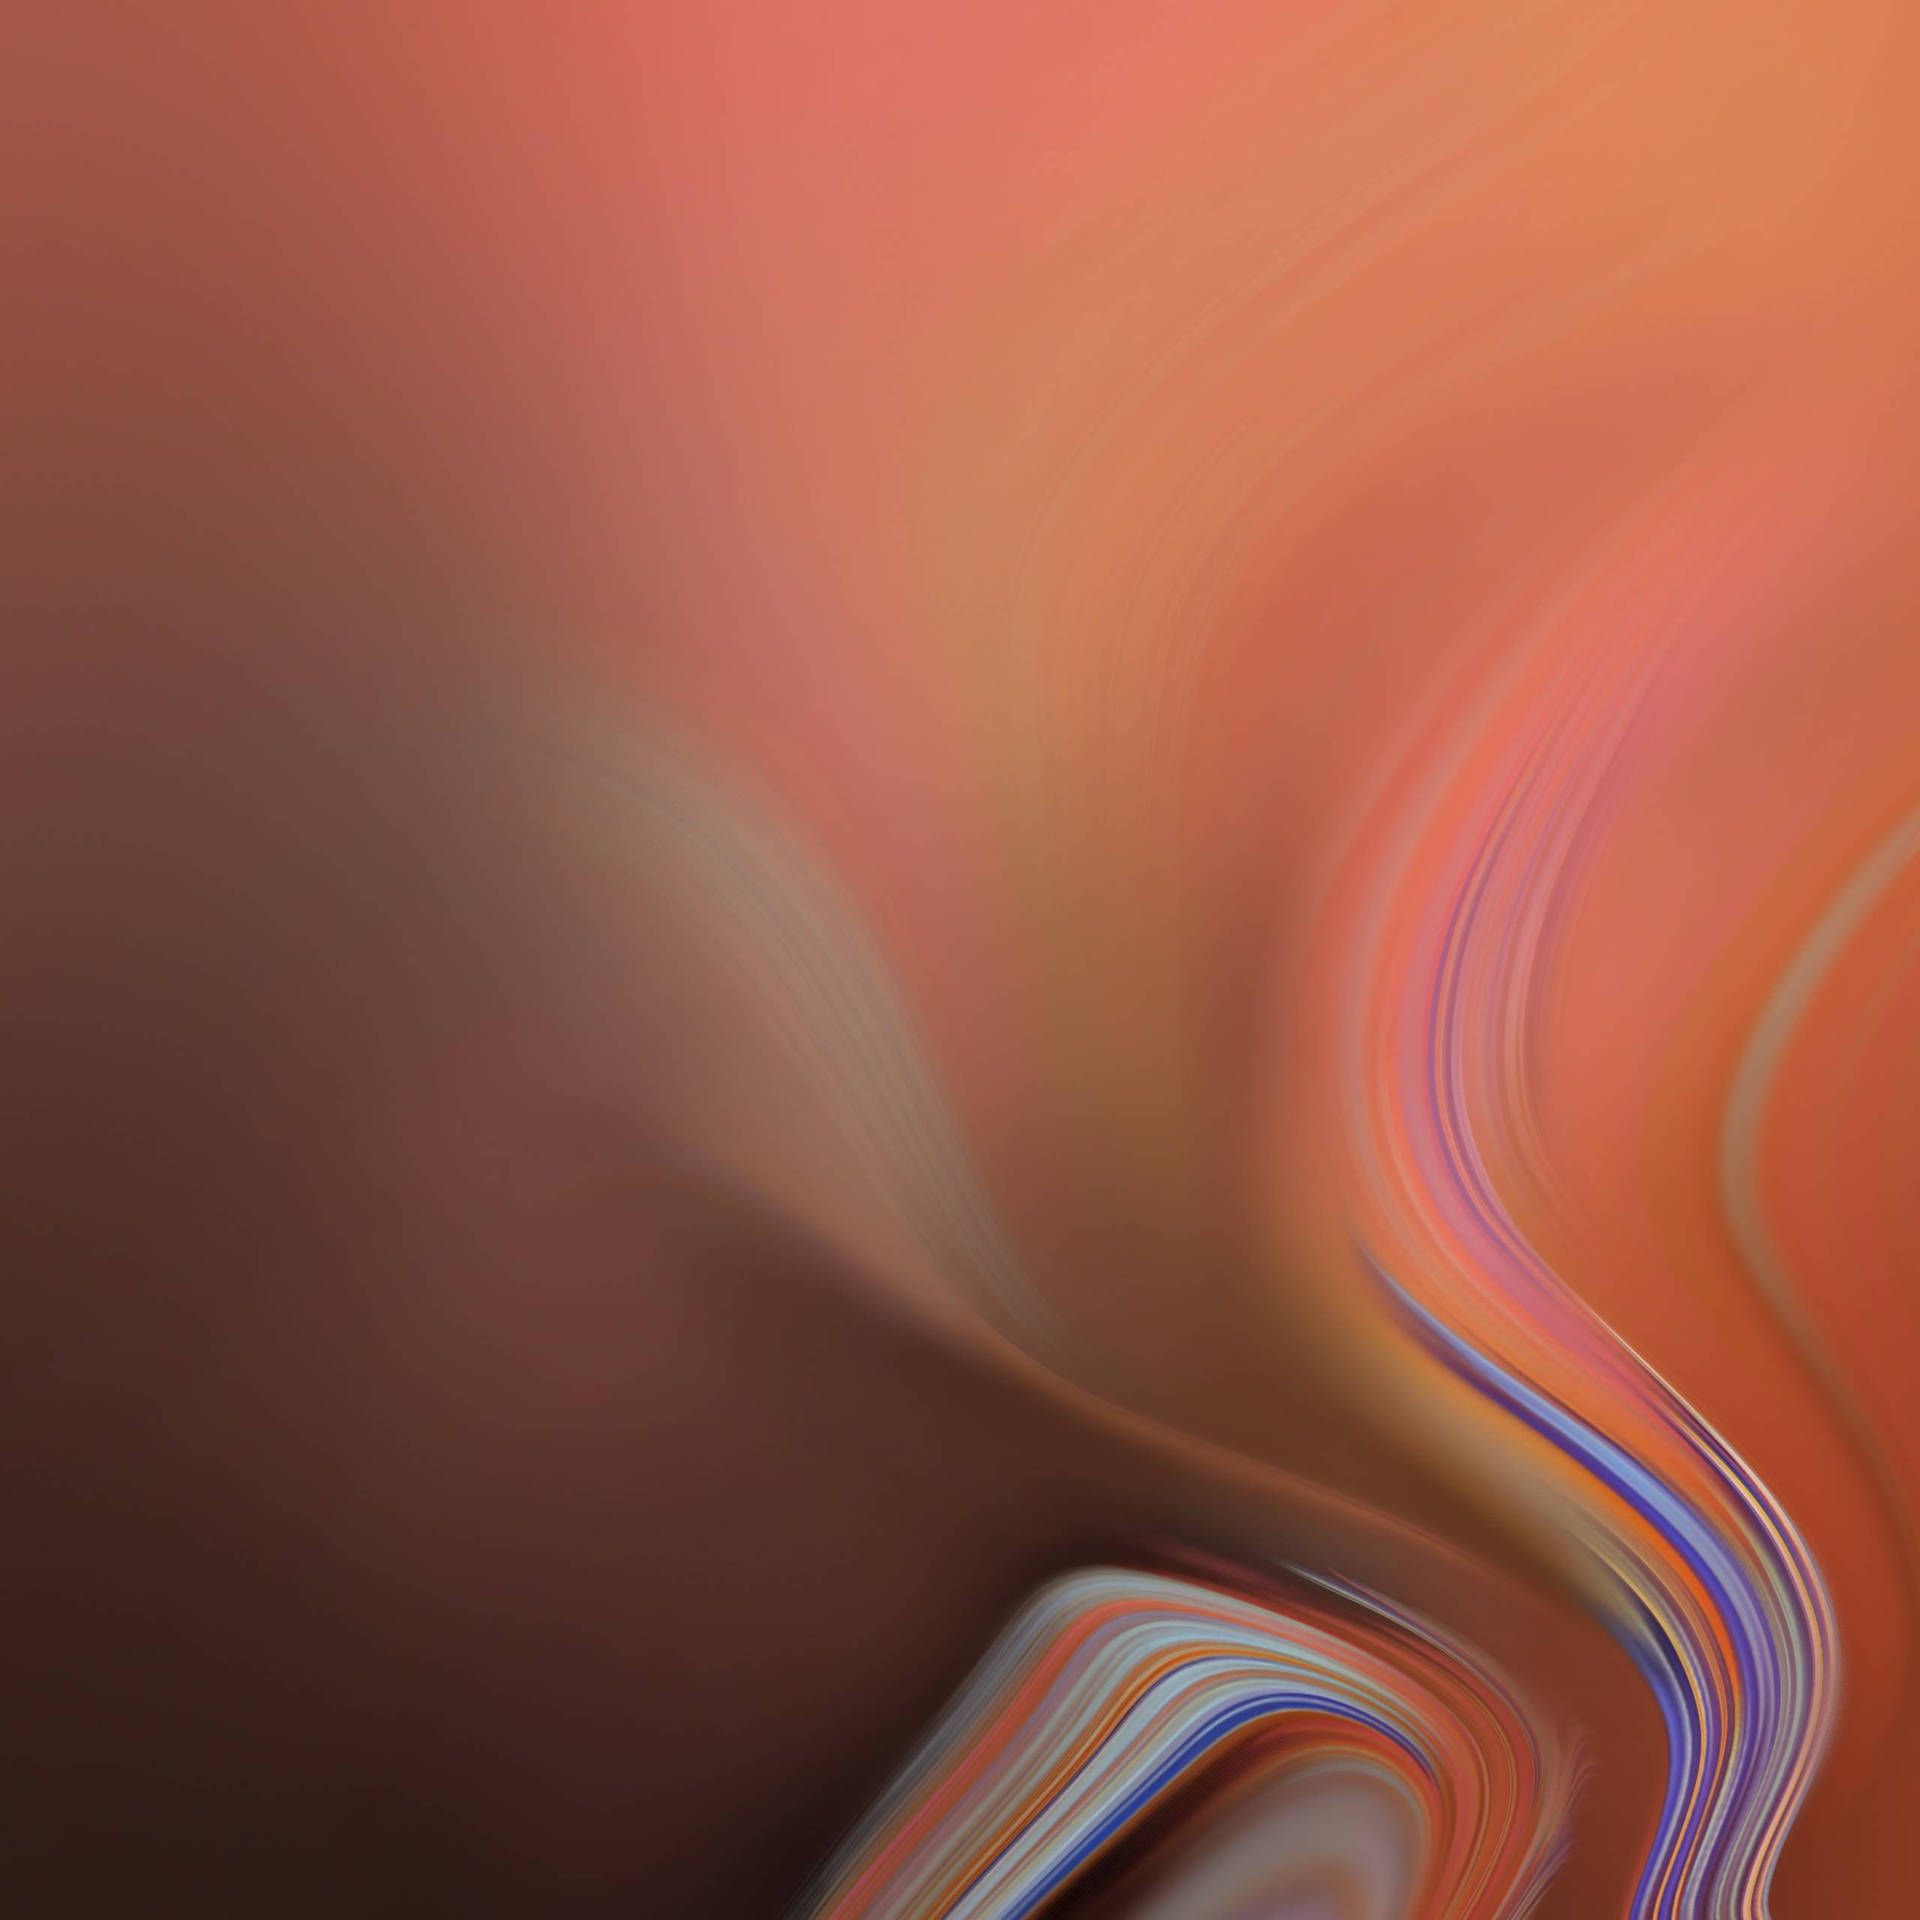 Abstract Art in Liquid form for Note 10 Wallpaper